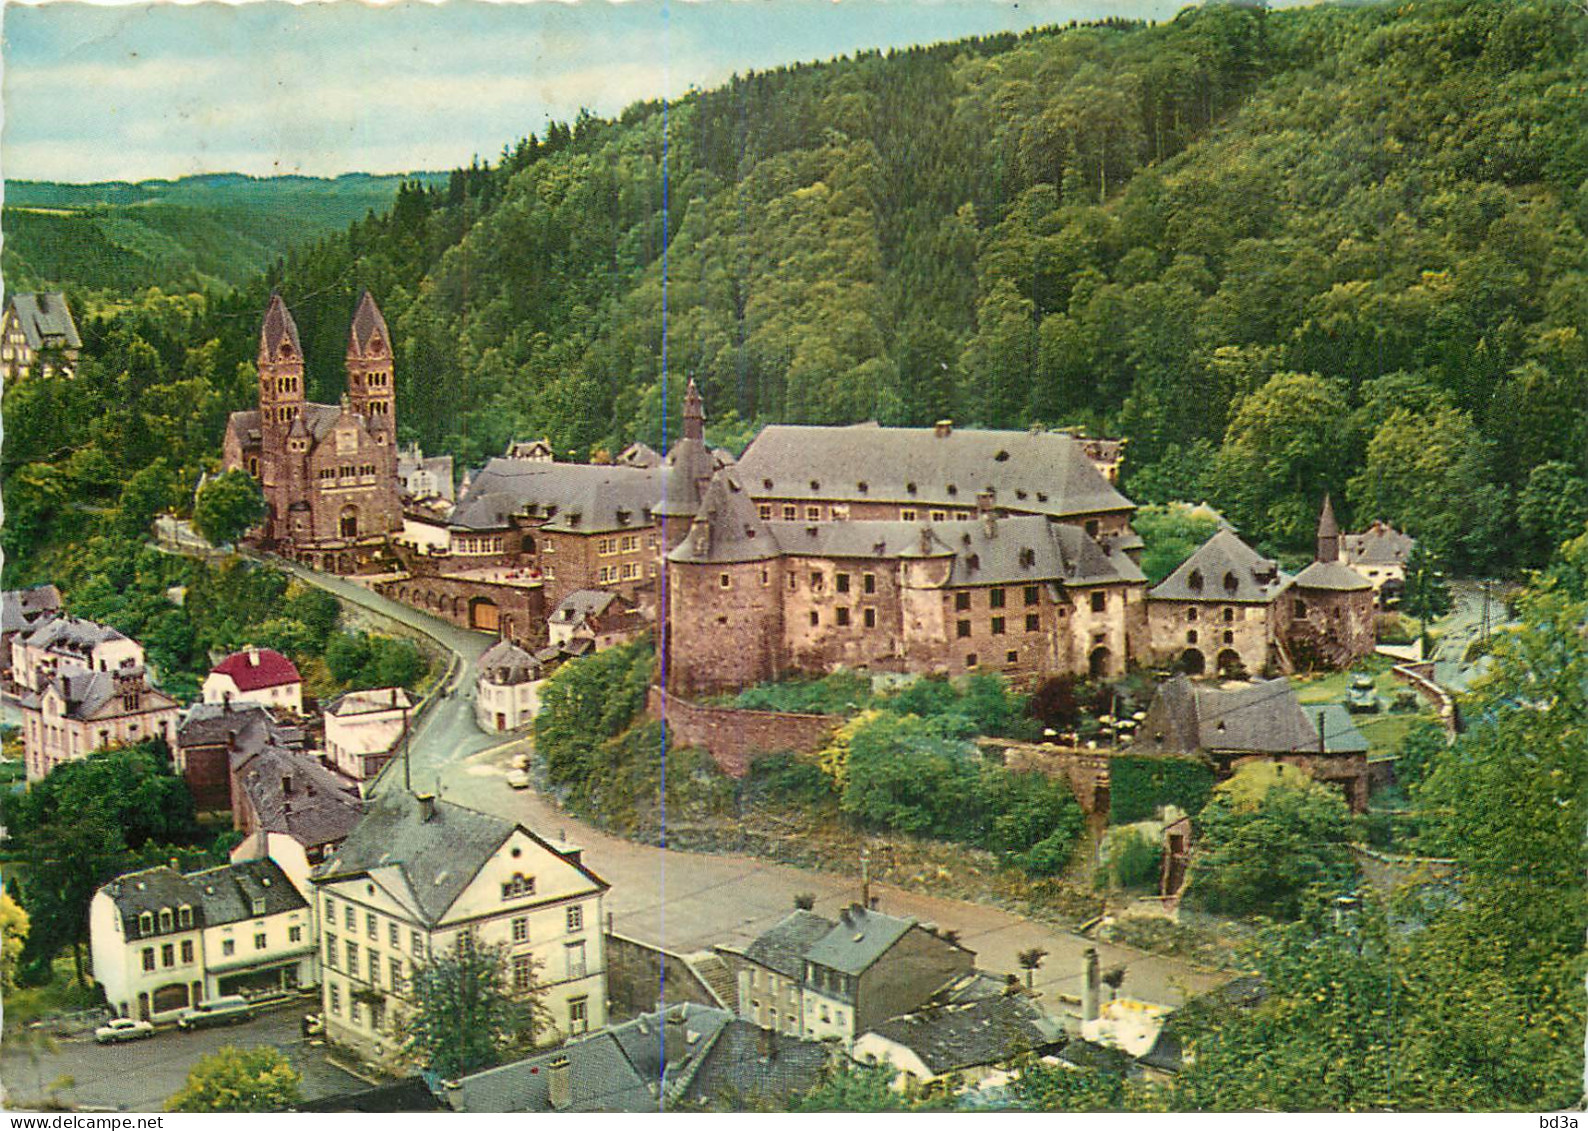  LUXEMBOURG  CLERVAUX - Clervaux